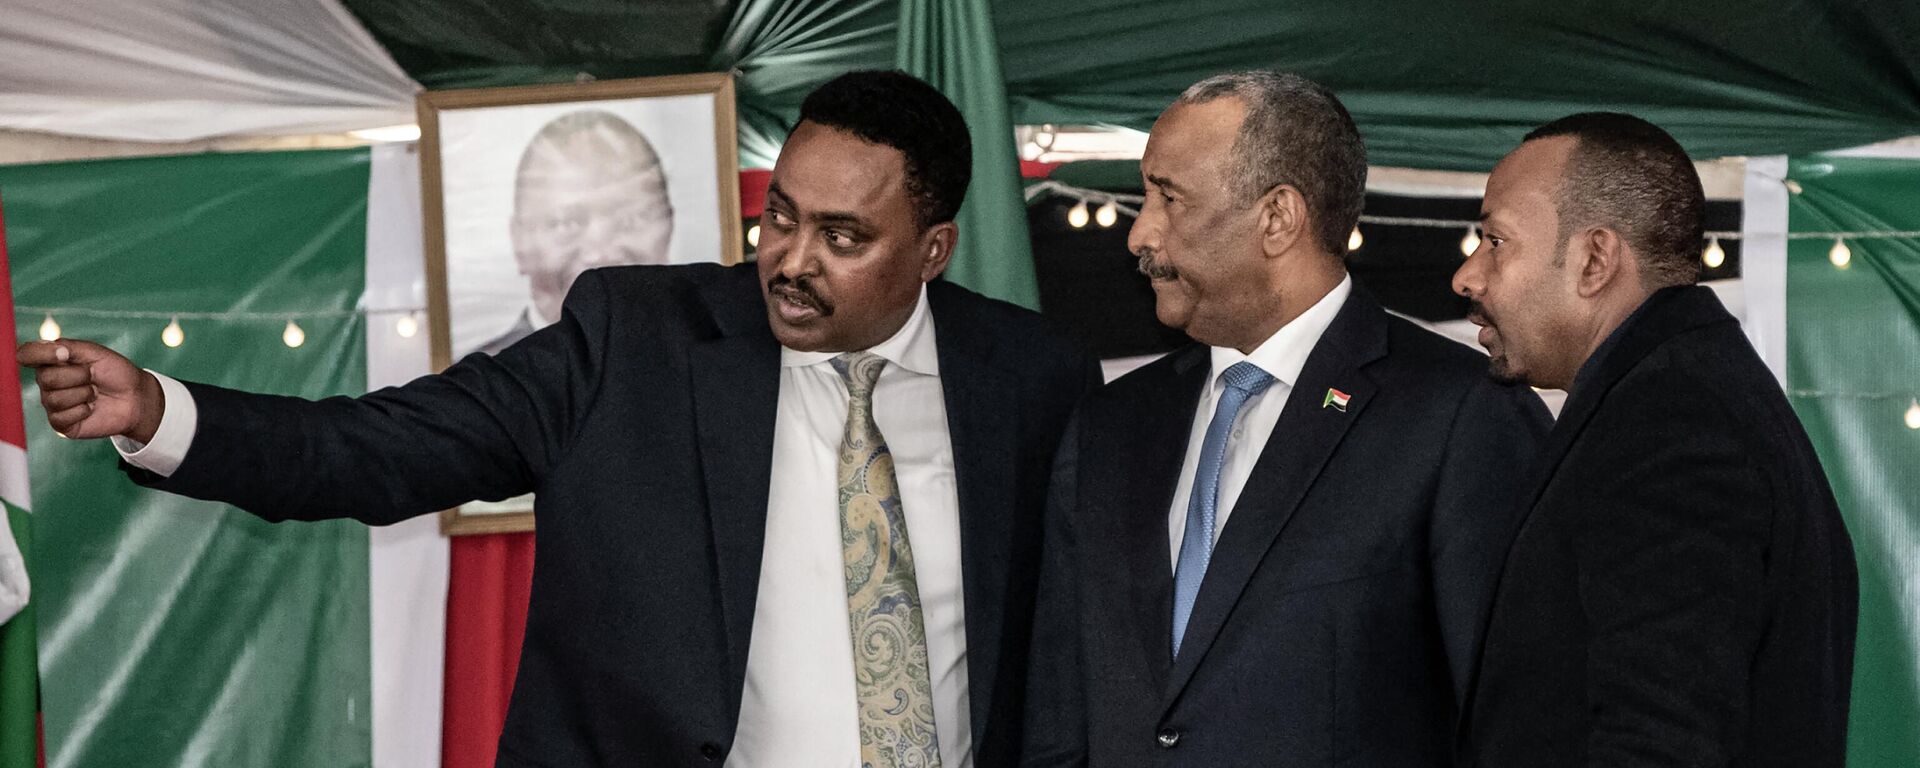 Executive Secretary of the Inter-Governmental Authority on Development (IGAD) and Ethiopia's Former Minister of Foreign Affairs Workneh Gebeyahu (L) gestures next to Sudan's President of the Transitional Sovereignty Council Abdel Fattah al-Burhan (C) and Ethiopia President Abiy Ahmed (R) during the 39th IGAD extraordinary summit in Nairobi on July 5, 2022. - Sputnik International, 1920, 06.07.2022